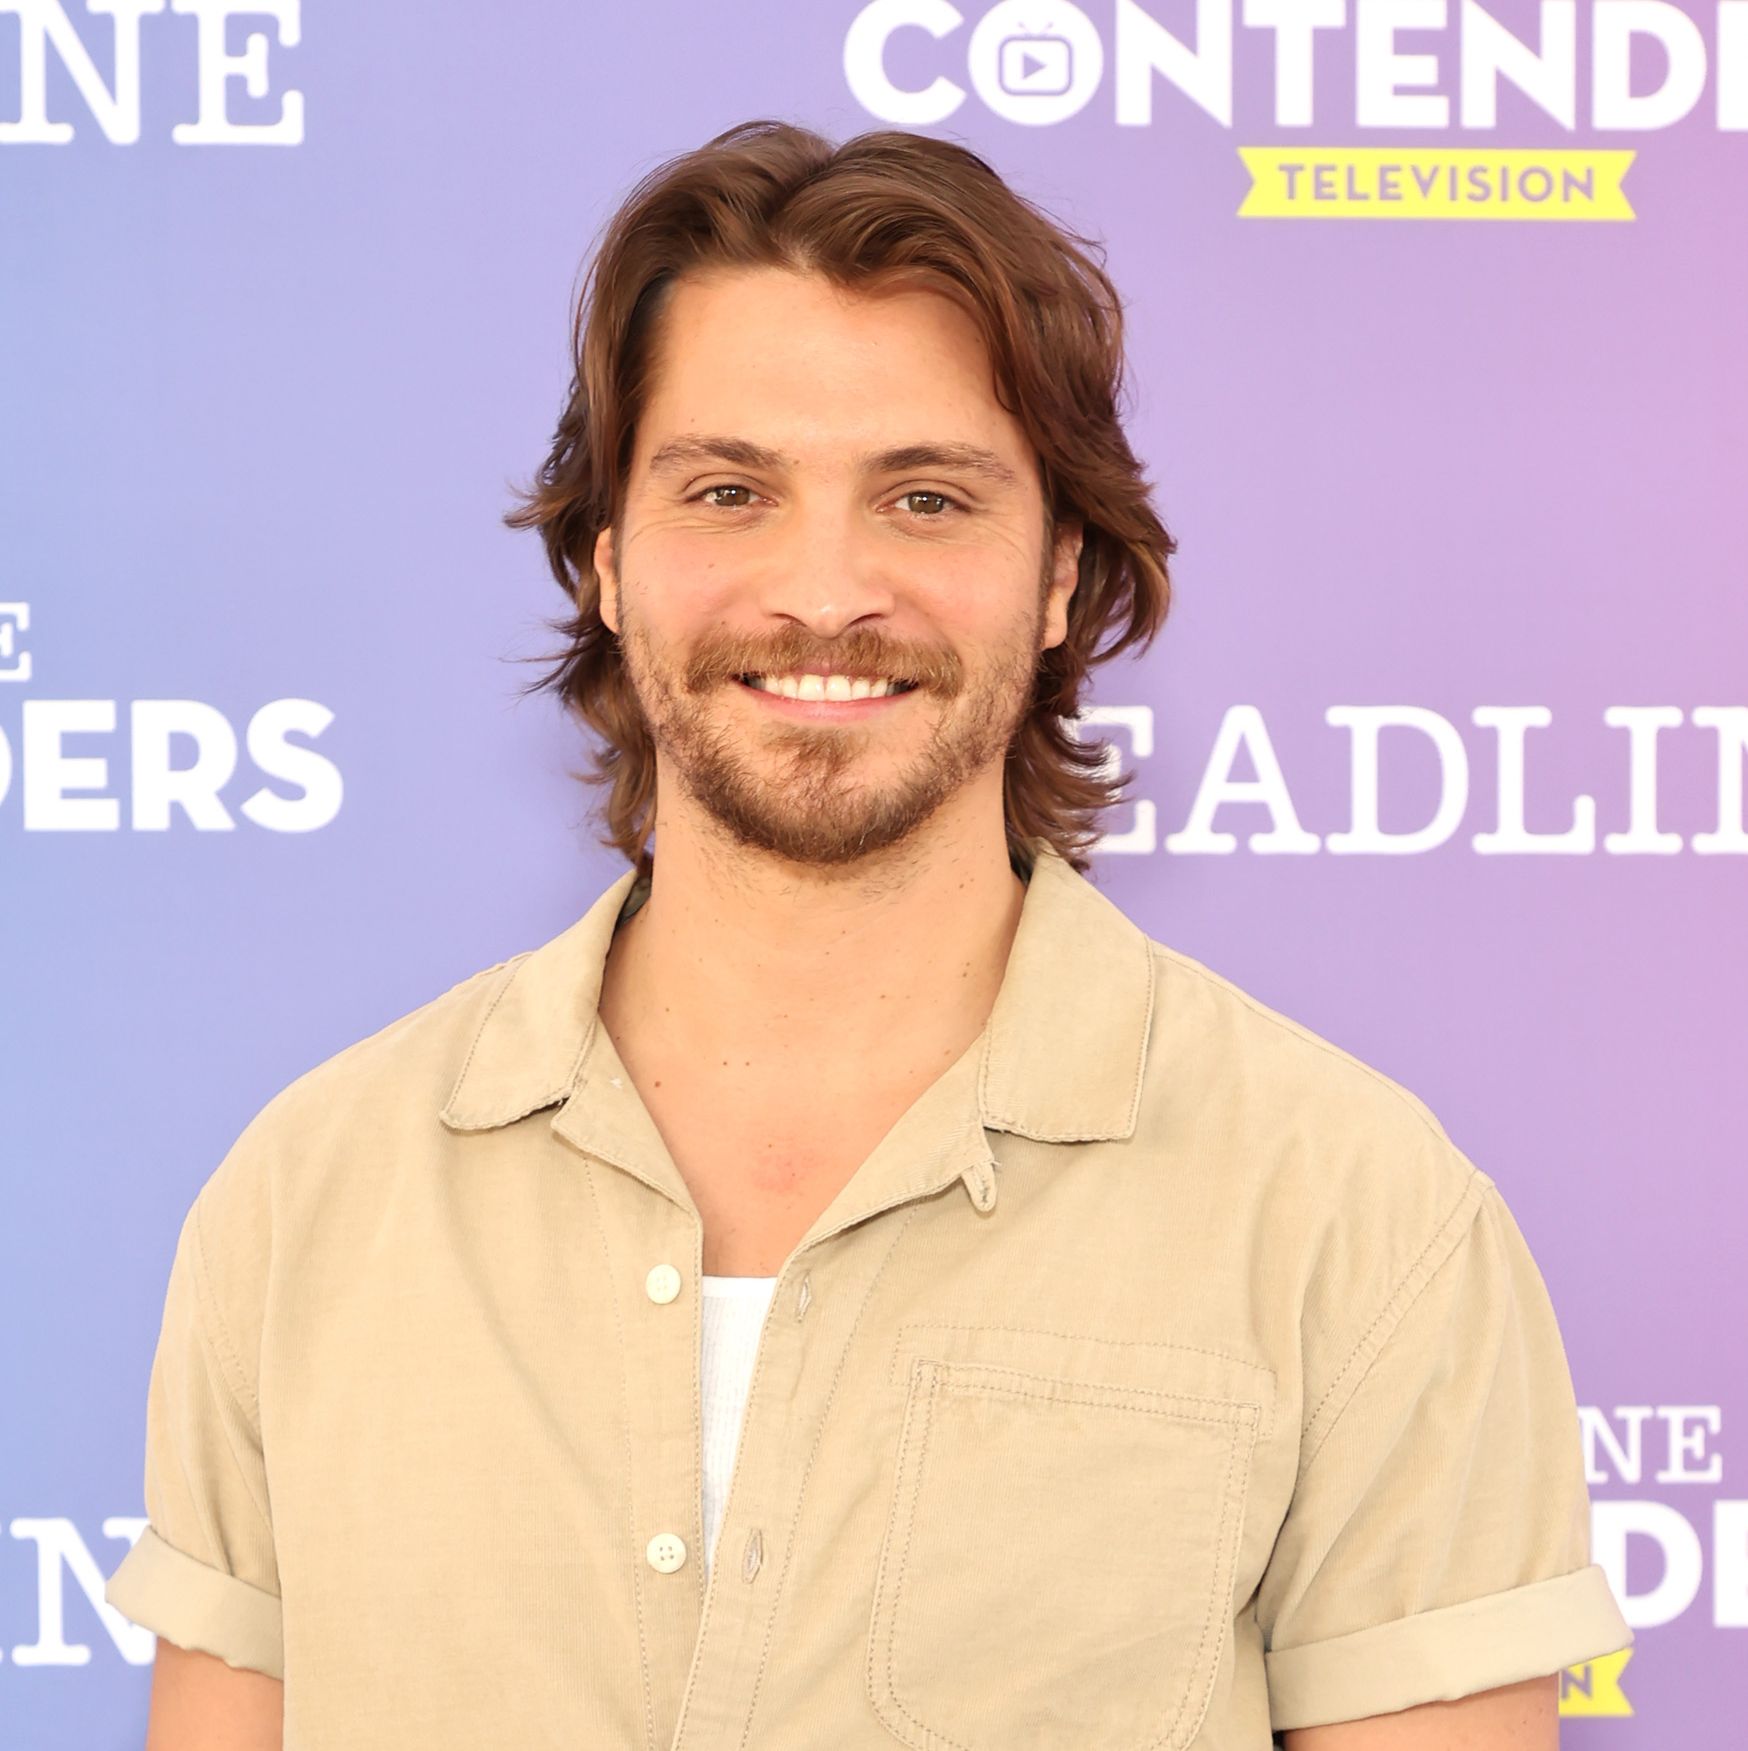 'Yellowstone' Fans Can't Contain Their Excitement After Luke Grimes Announces Big News